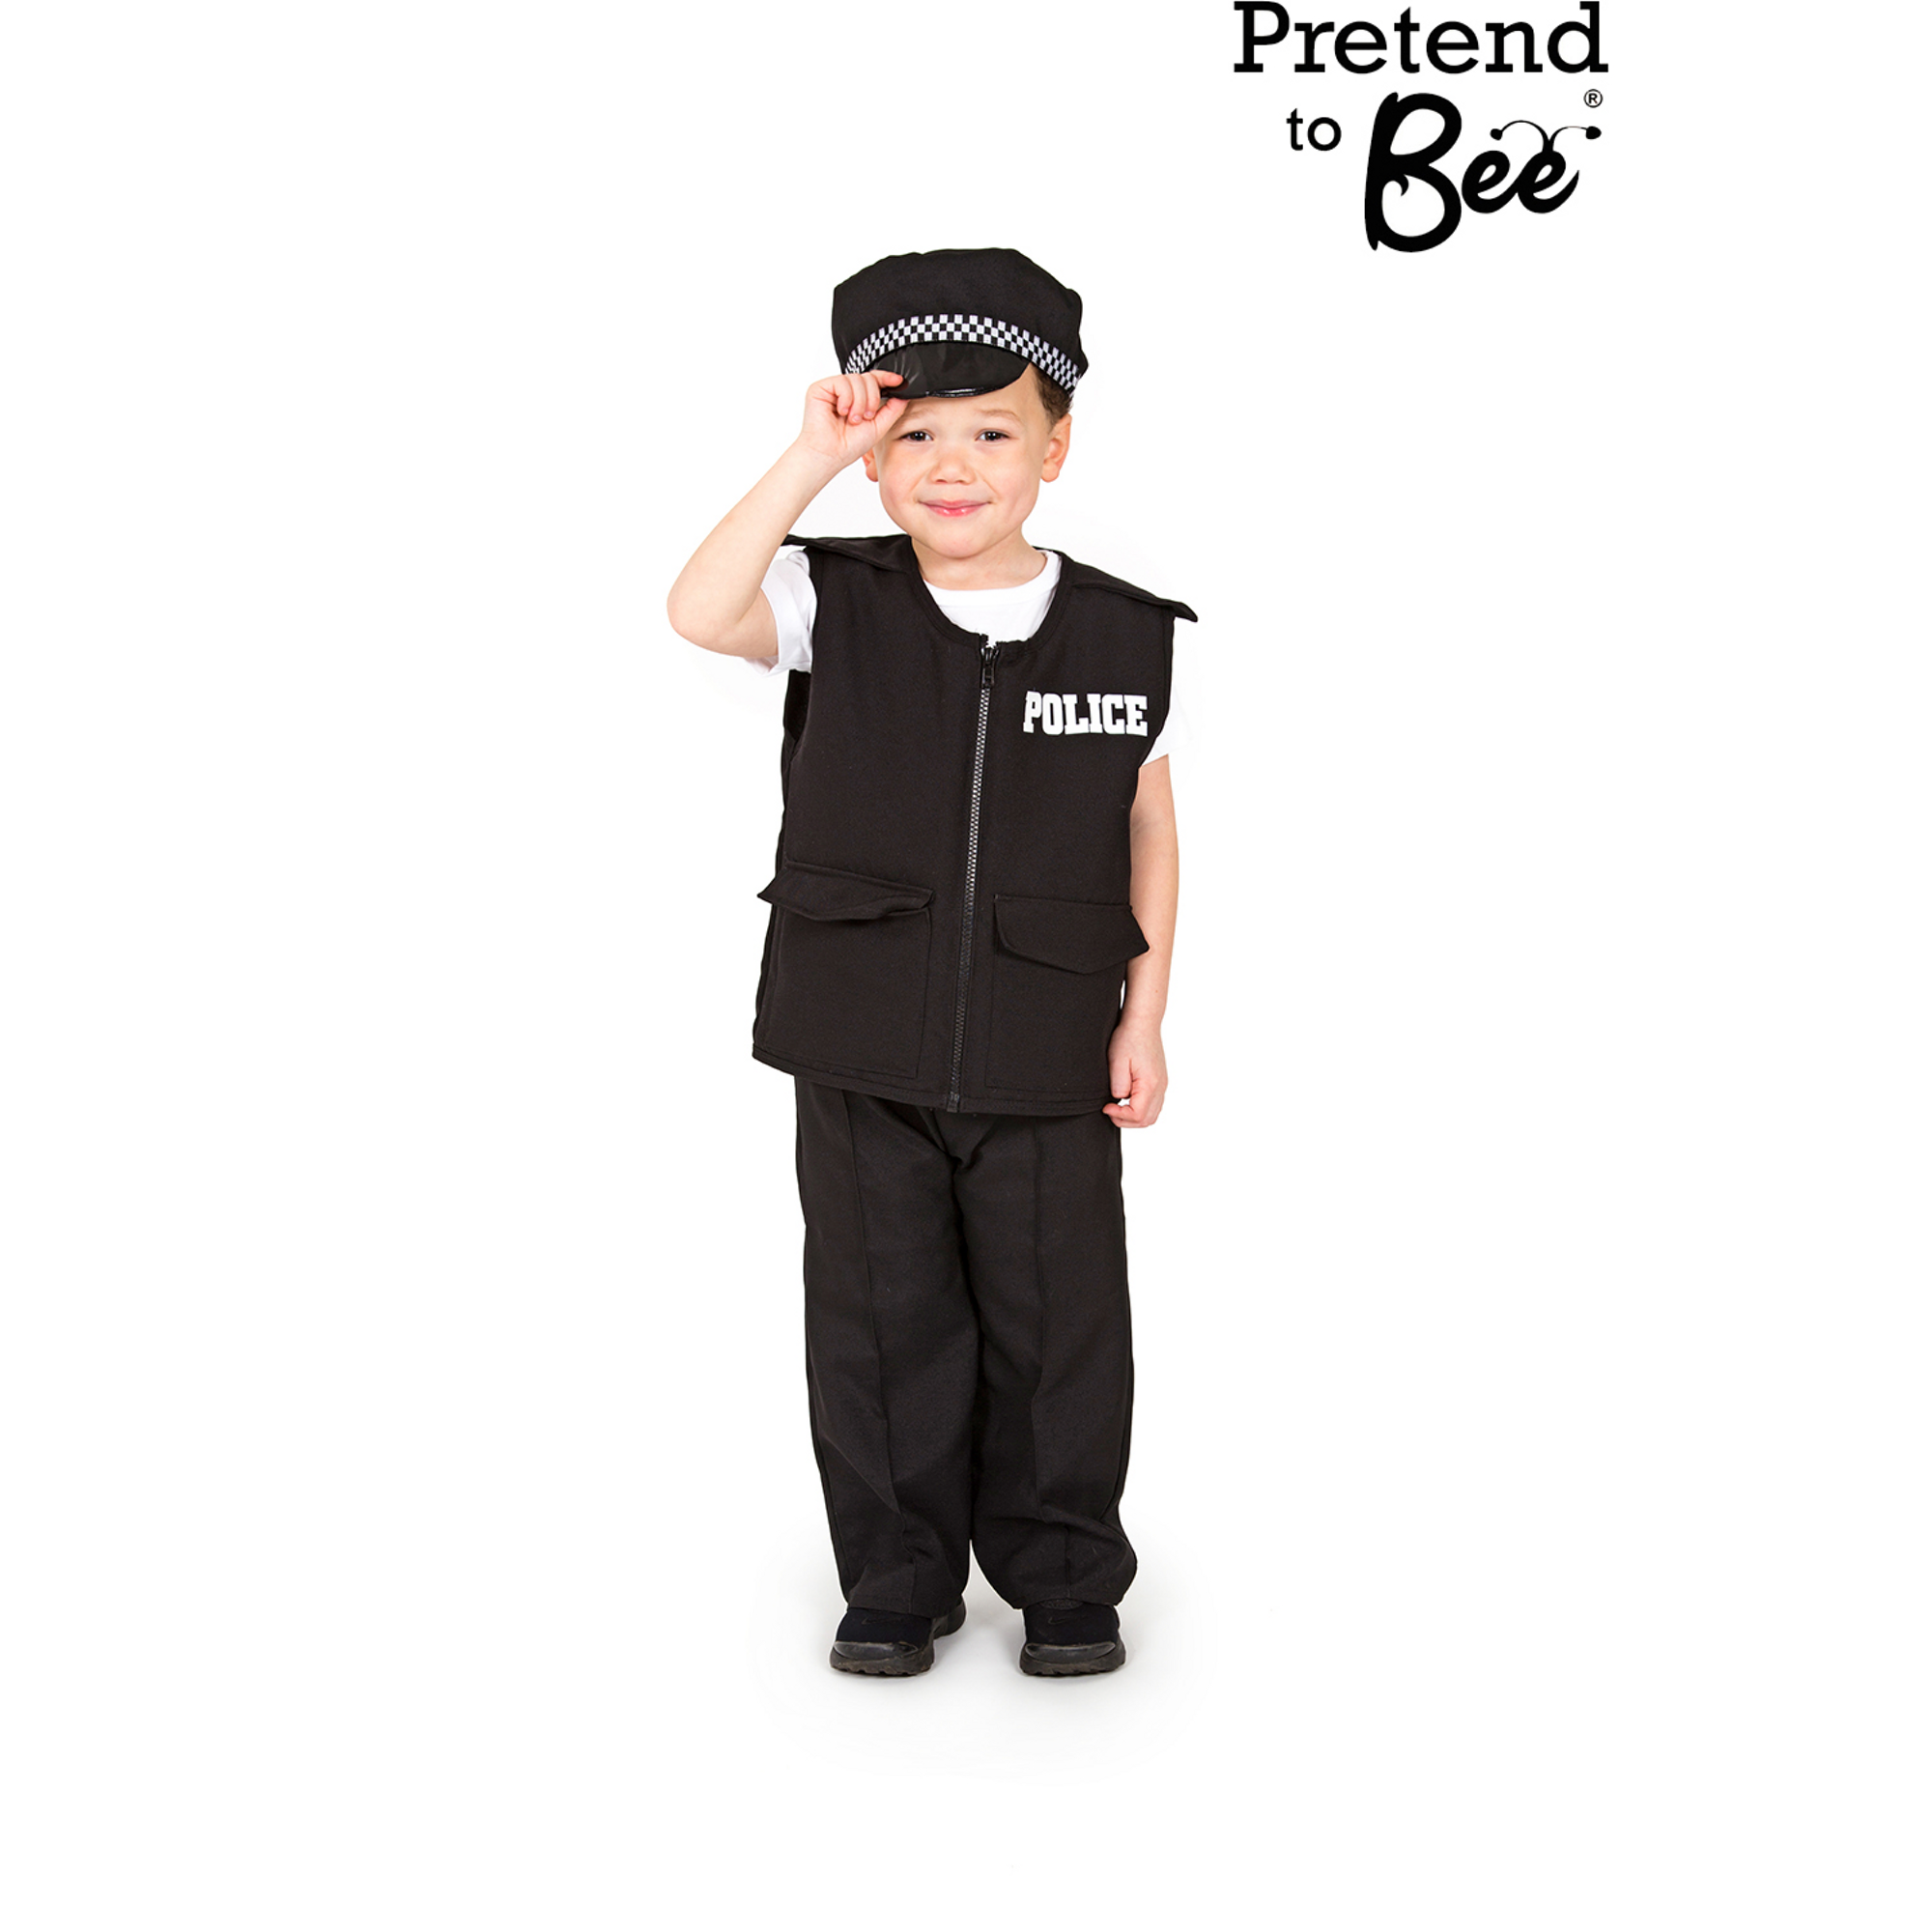 Police Person 3 - 5 Years